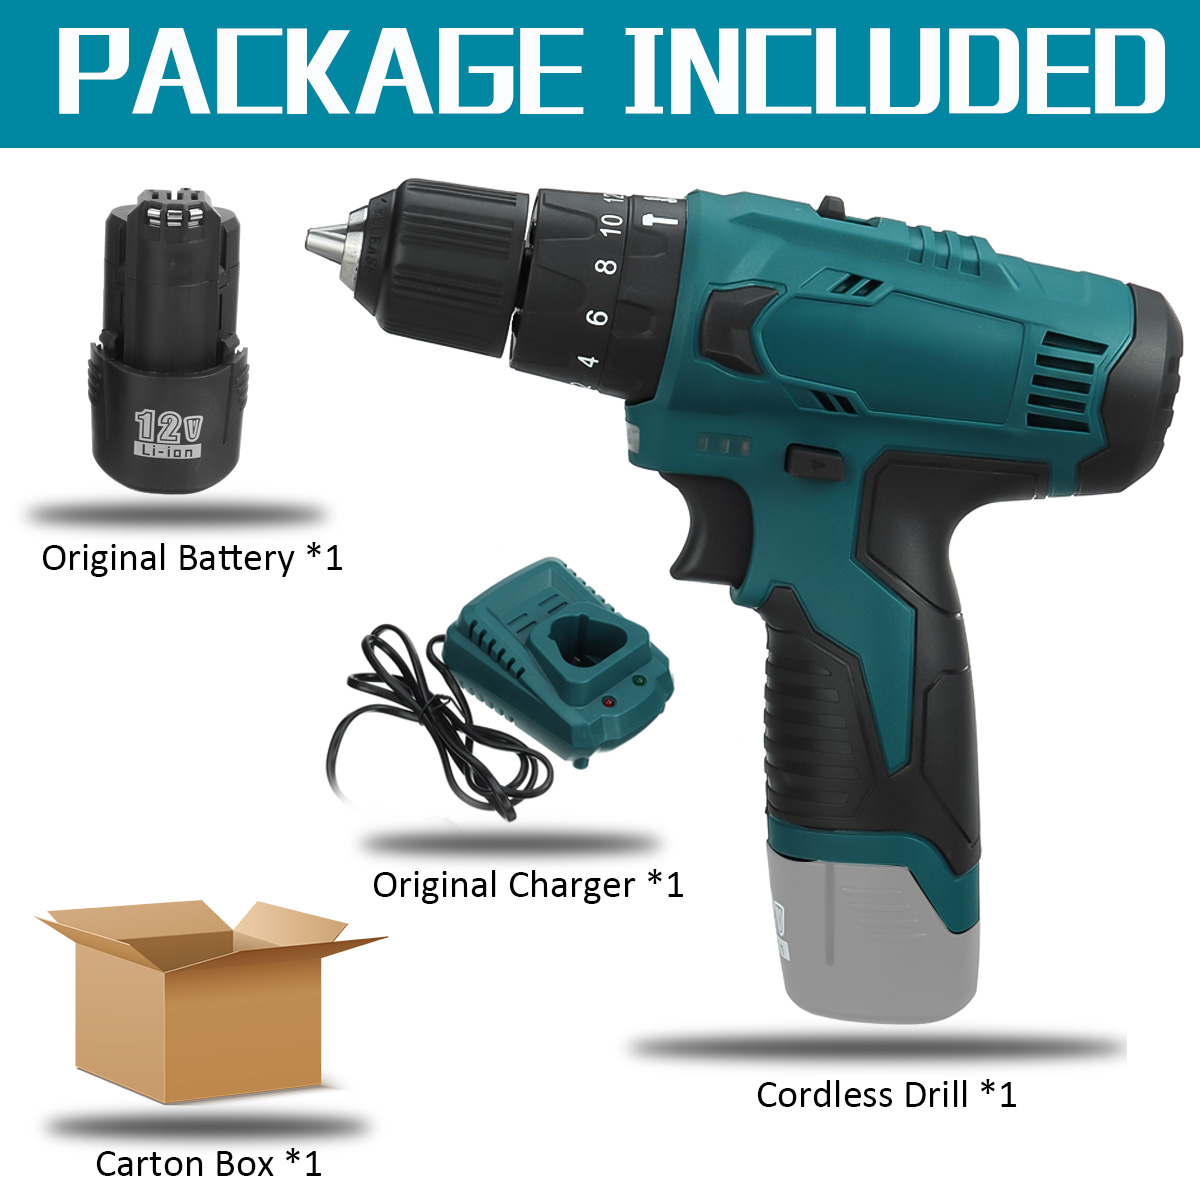 12V-1500mAh-3-IN-1-2-Speed-Cordless-Drill-Driver-Electric-Screwdriver-Hammer-Flat-Drill-183-Torque-1-1868432-6